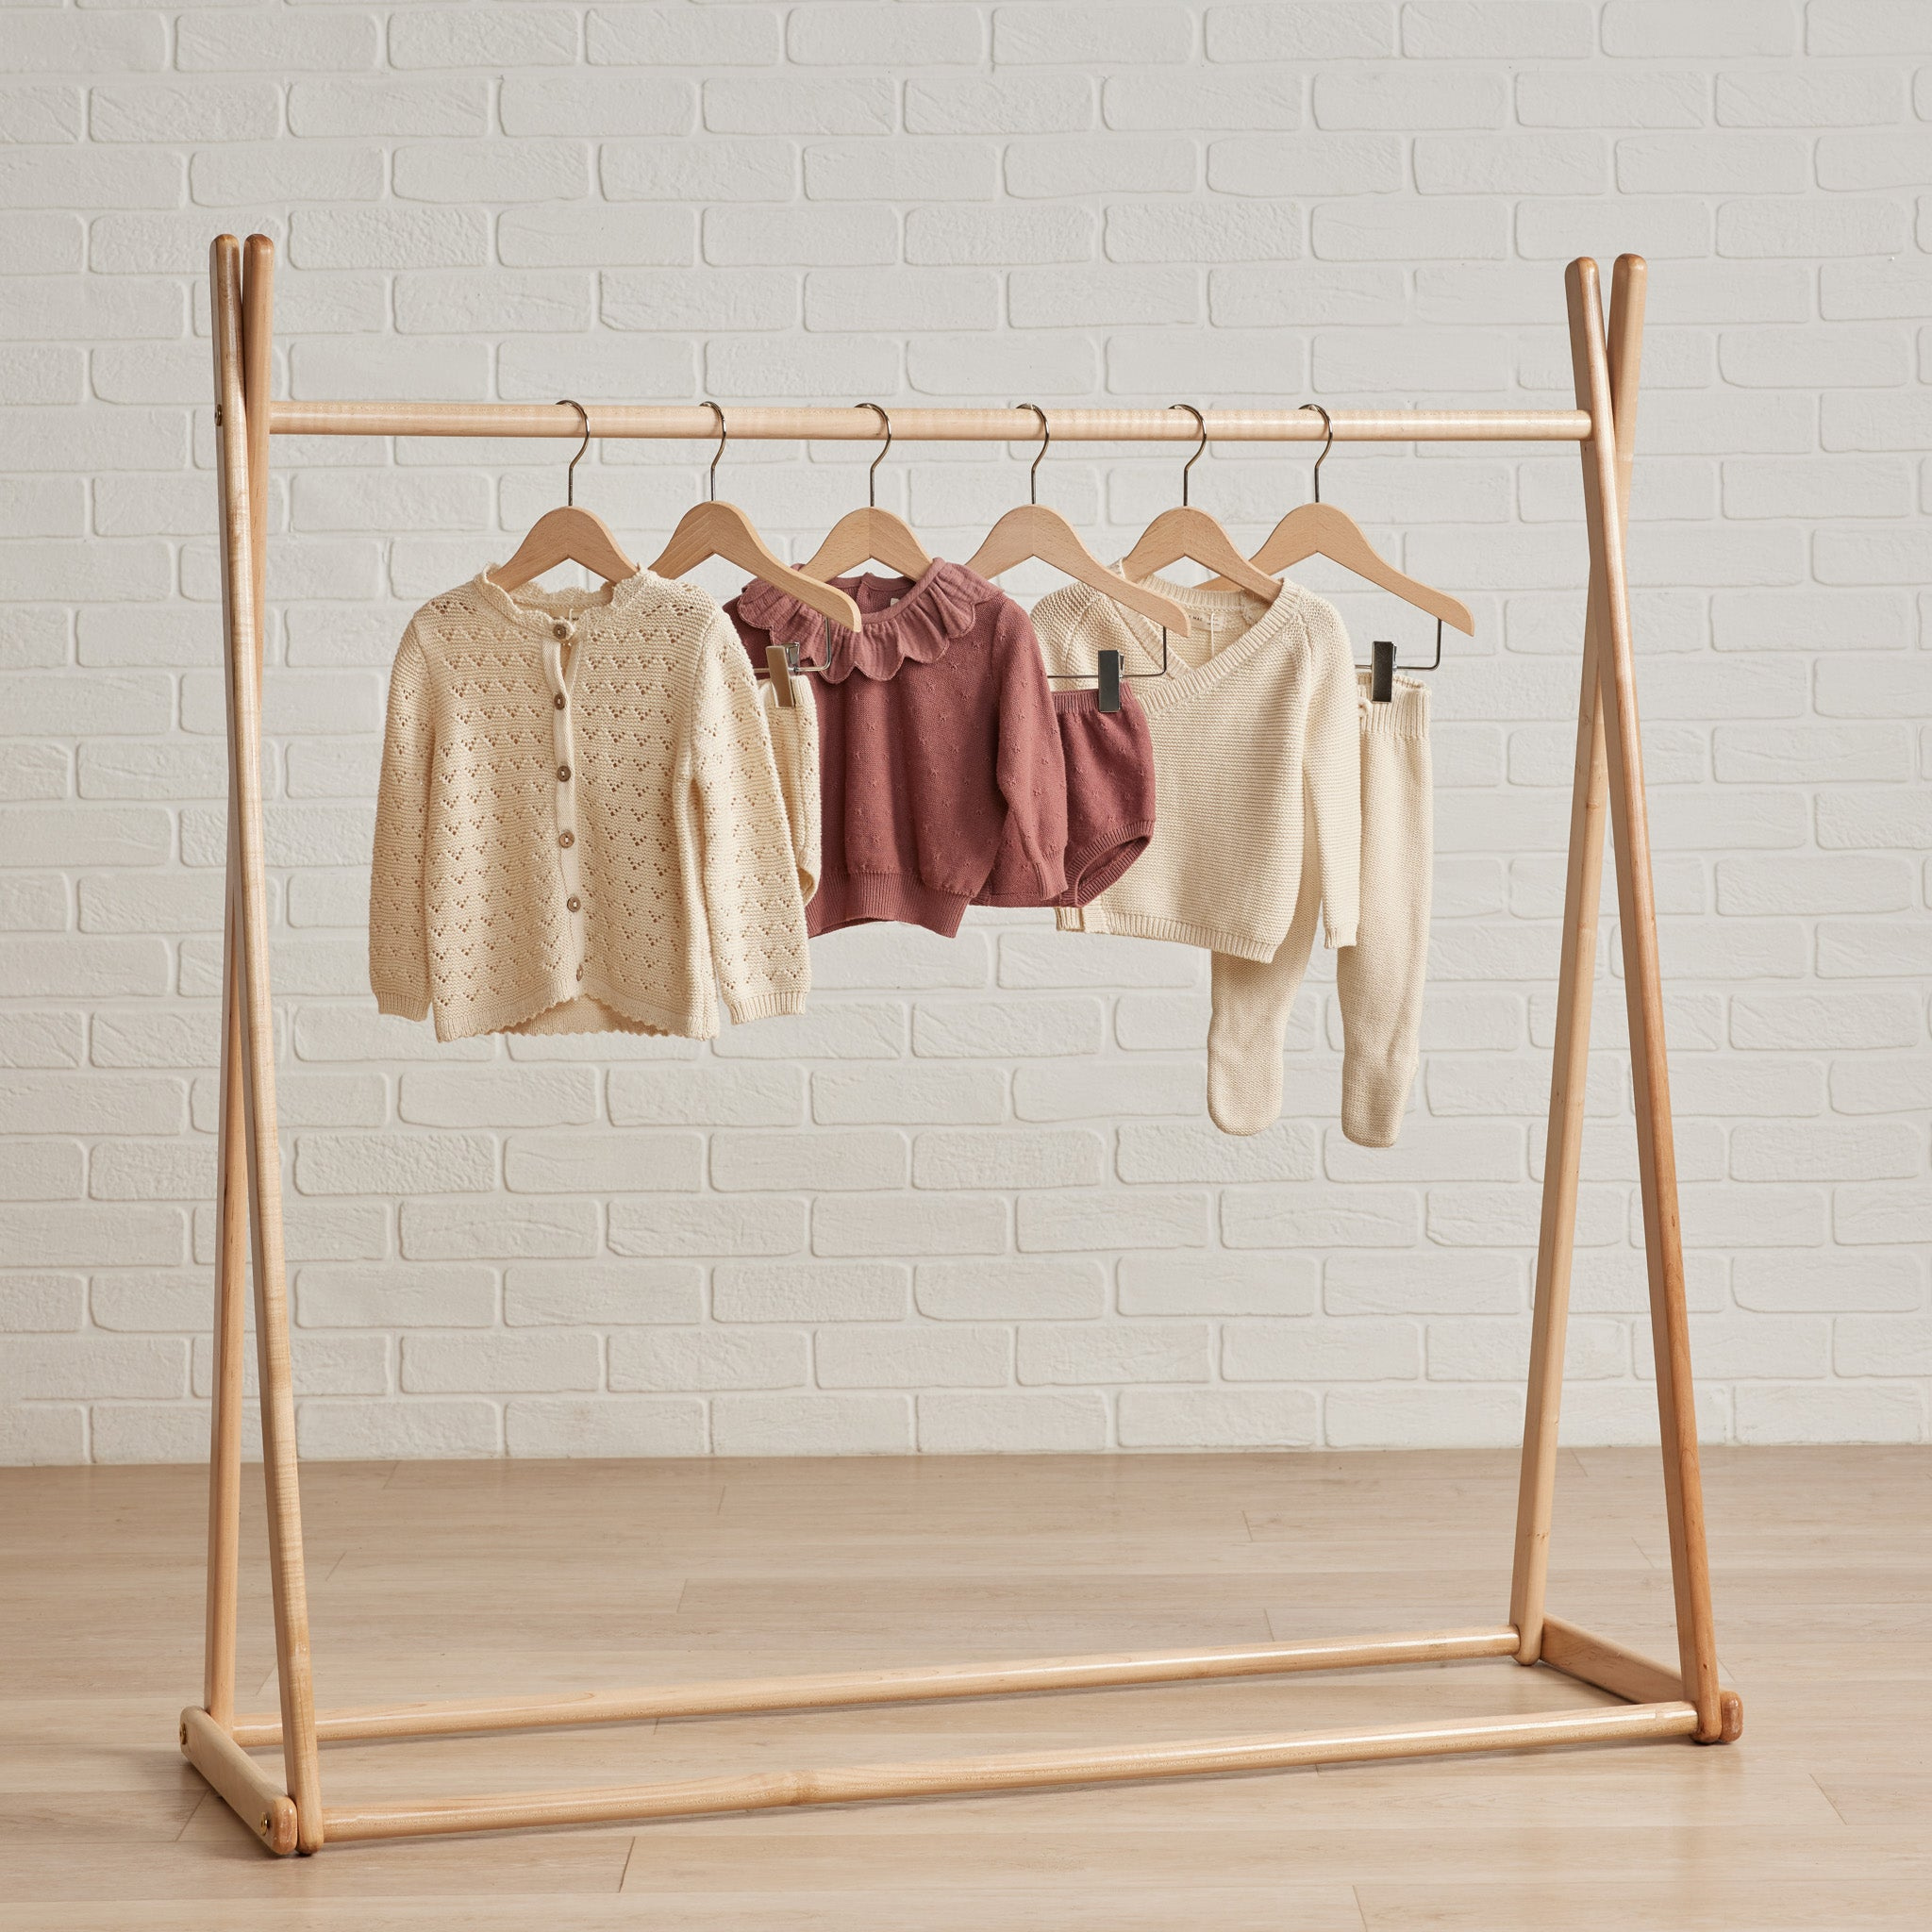 WOODEN CLOTHES RACK  Zara Home United States of America